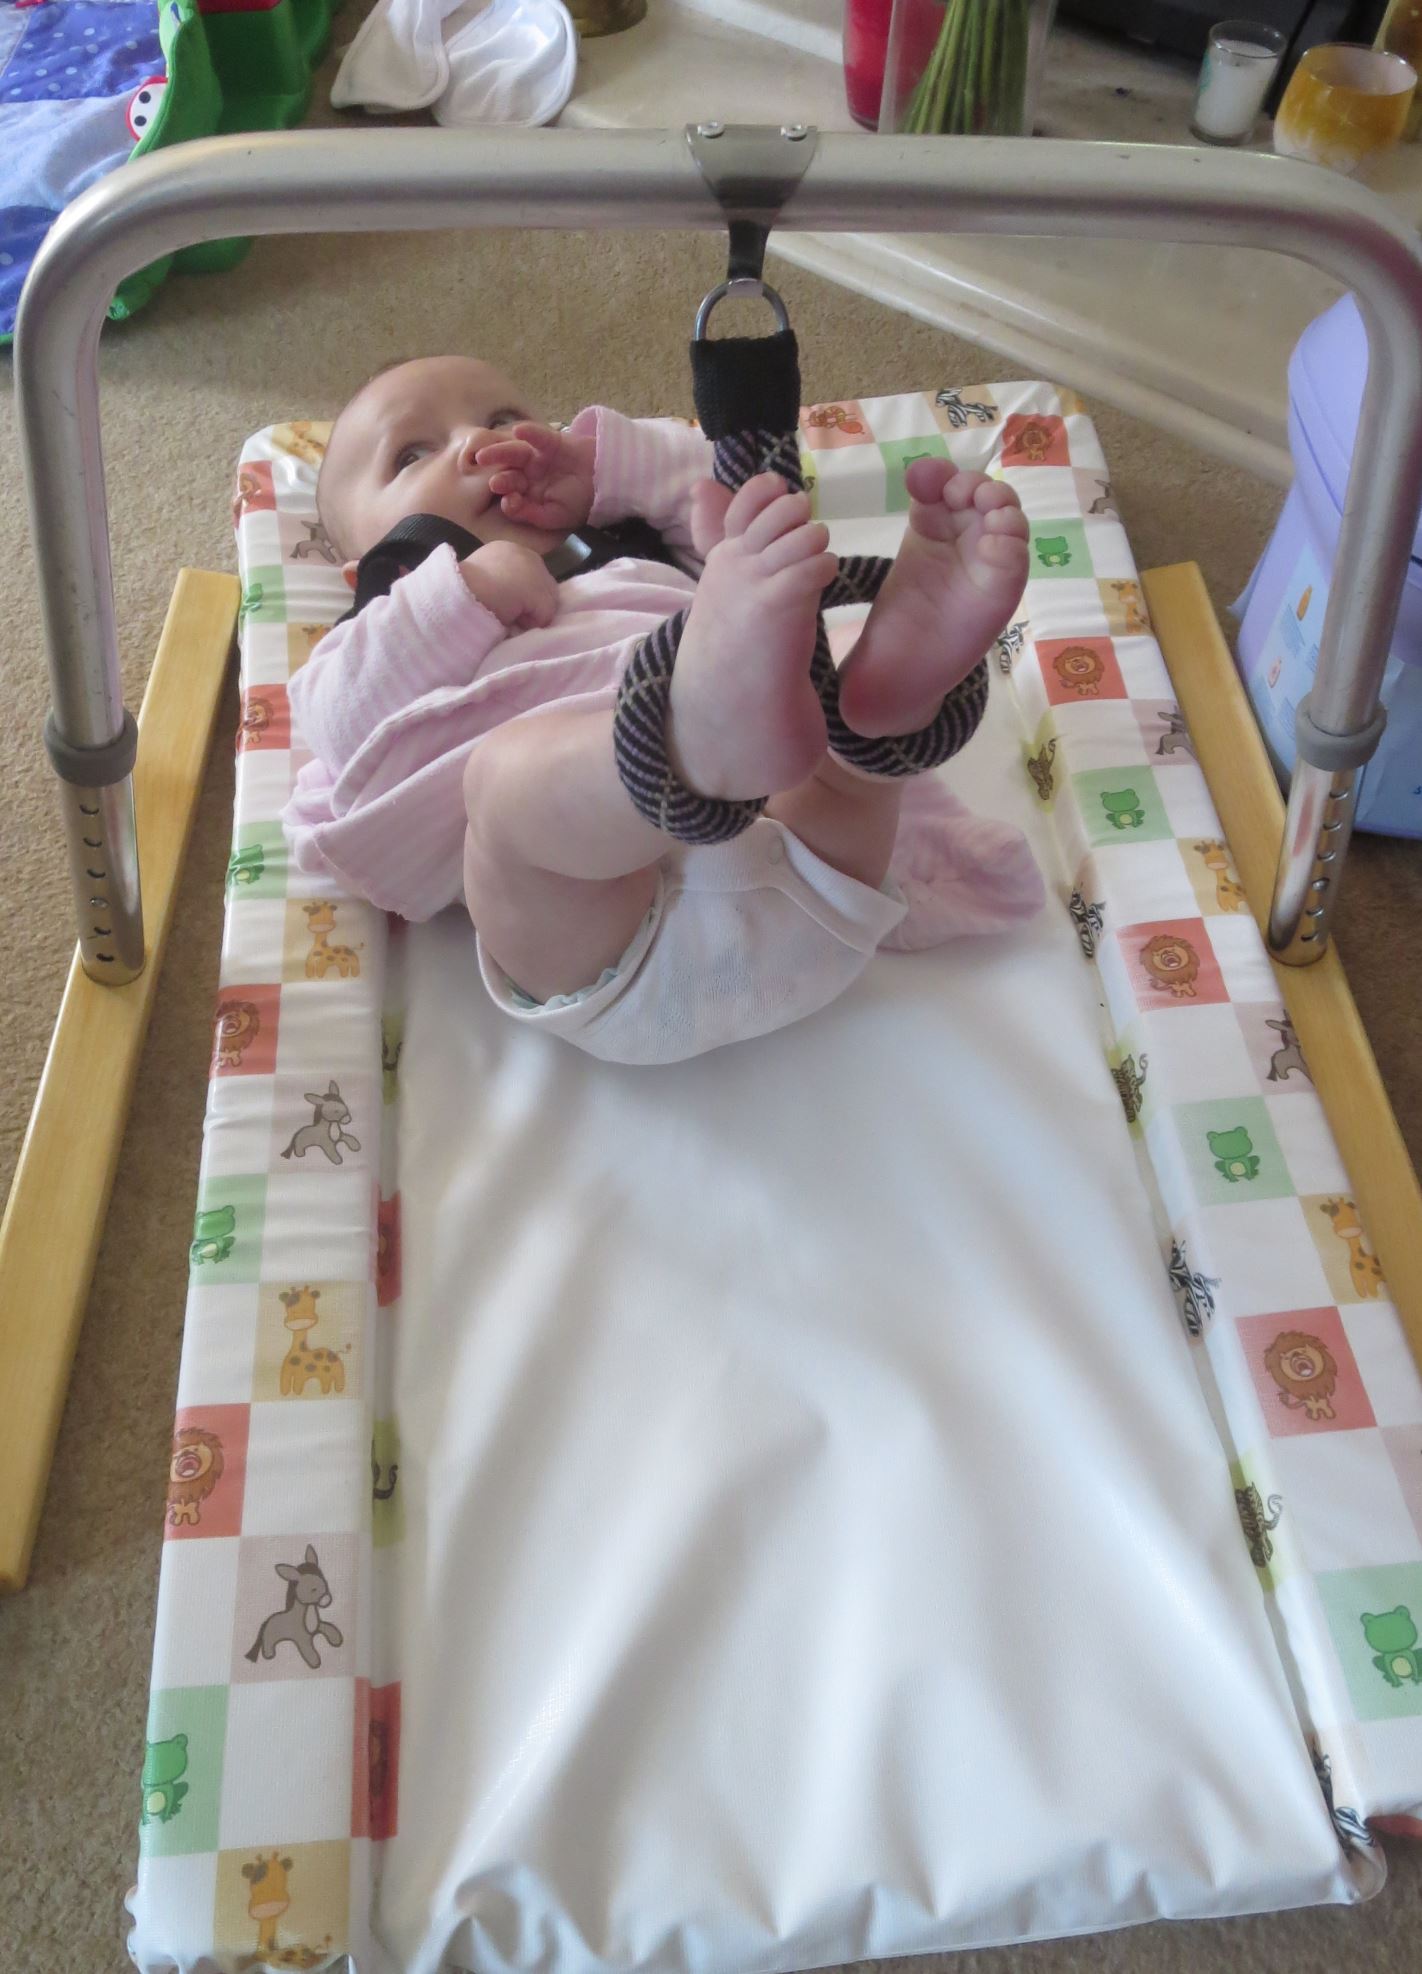 Remap's nappy changing frame to help a disabled mum